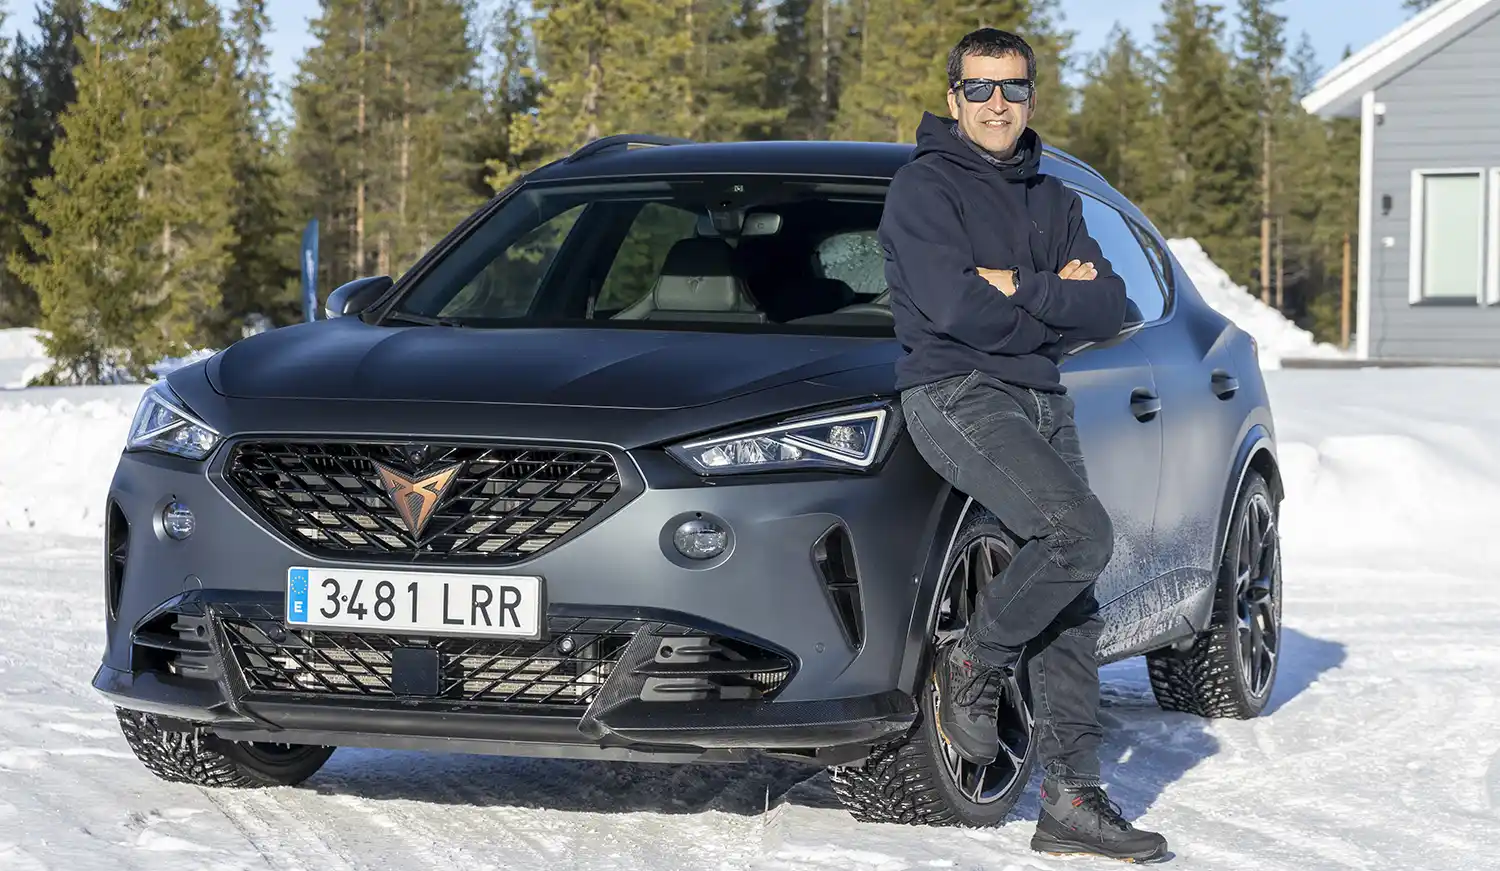 Cupra introduces the Ateca Impulse - car and motoring news by